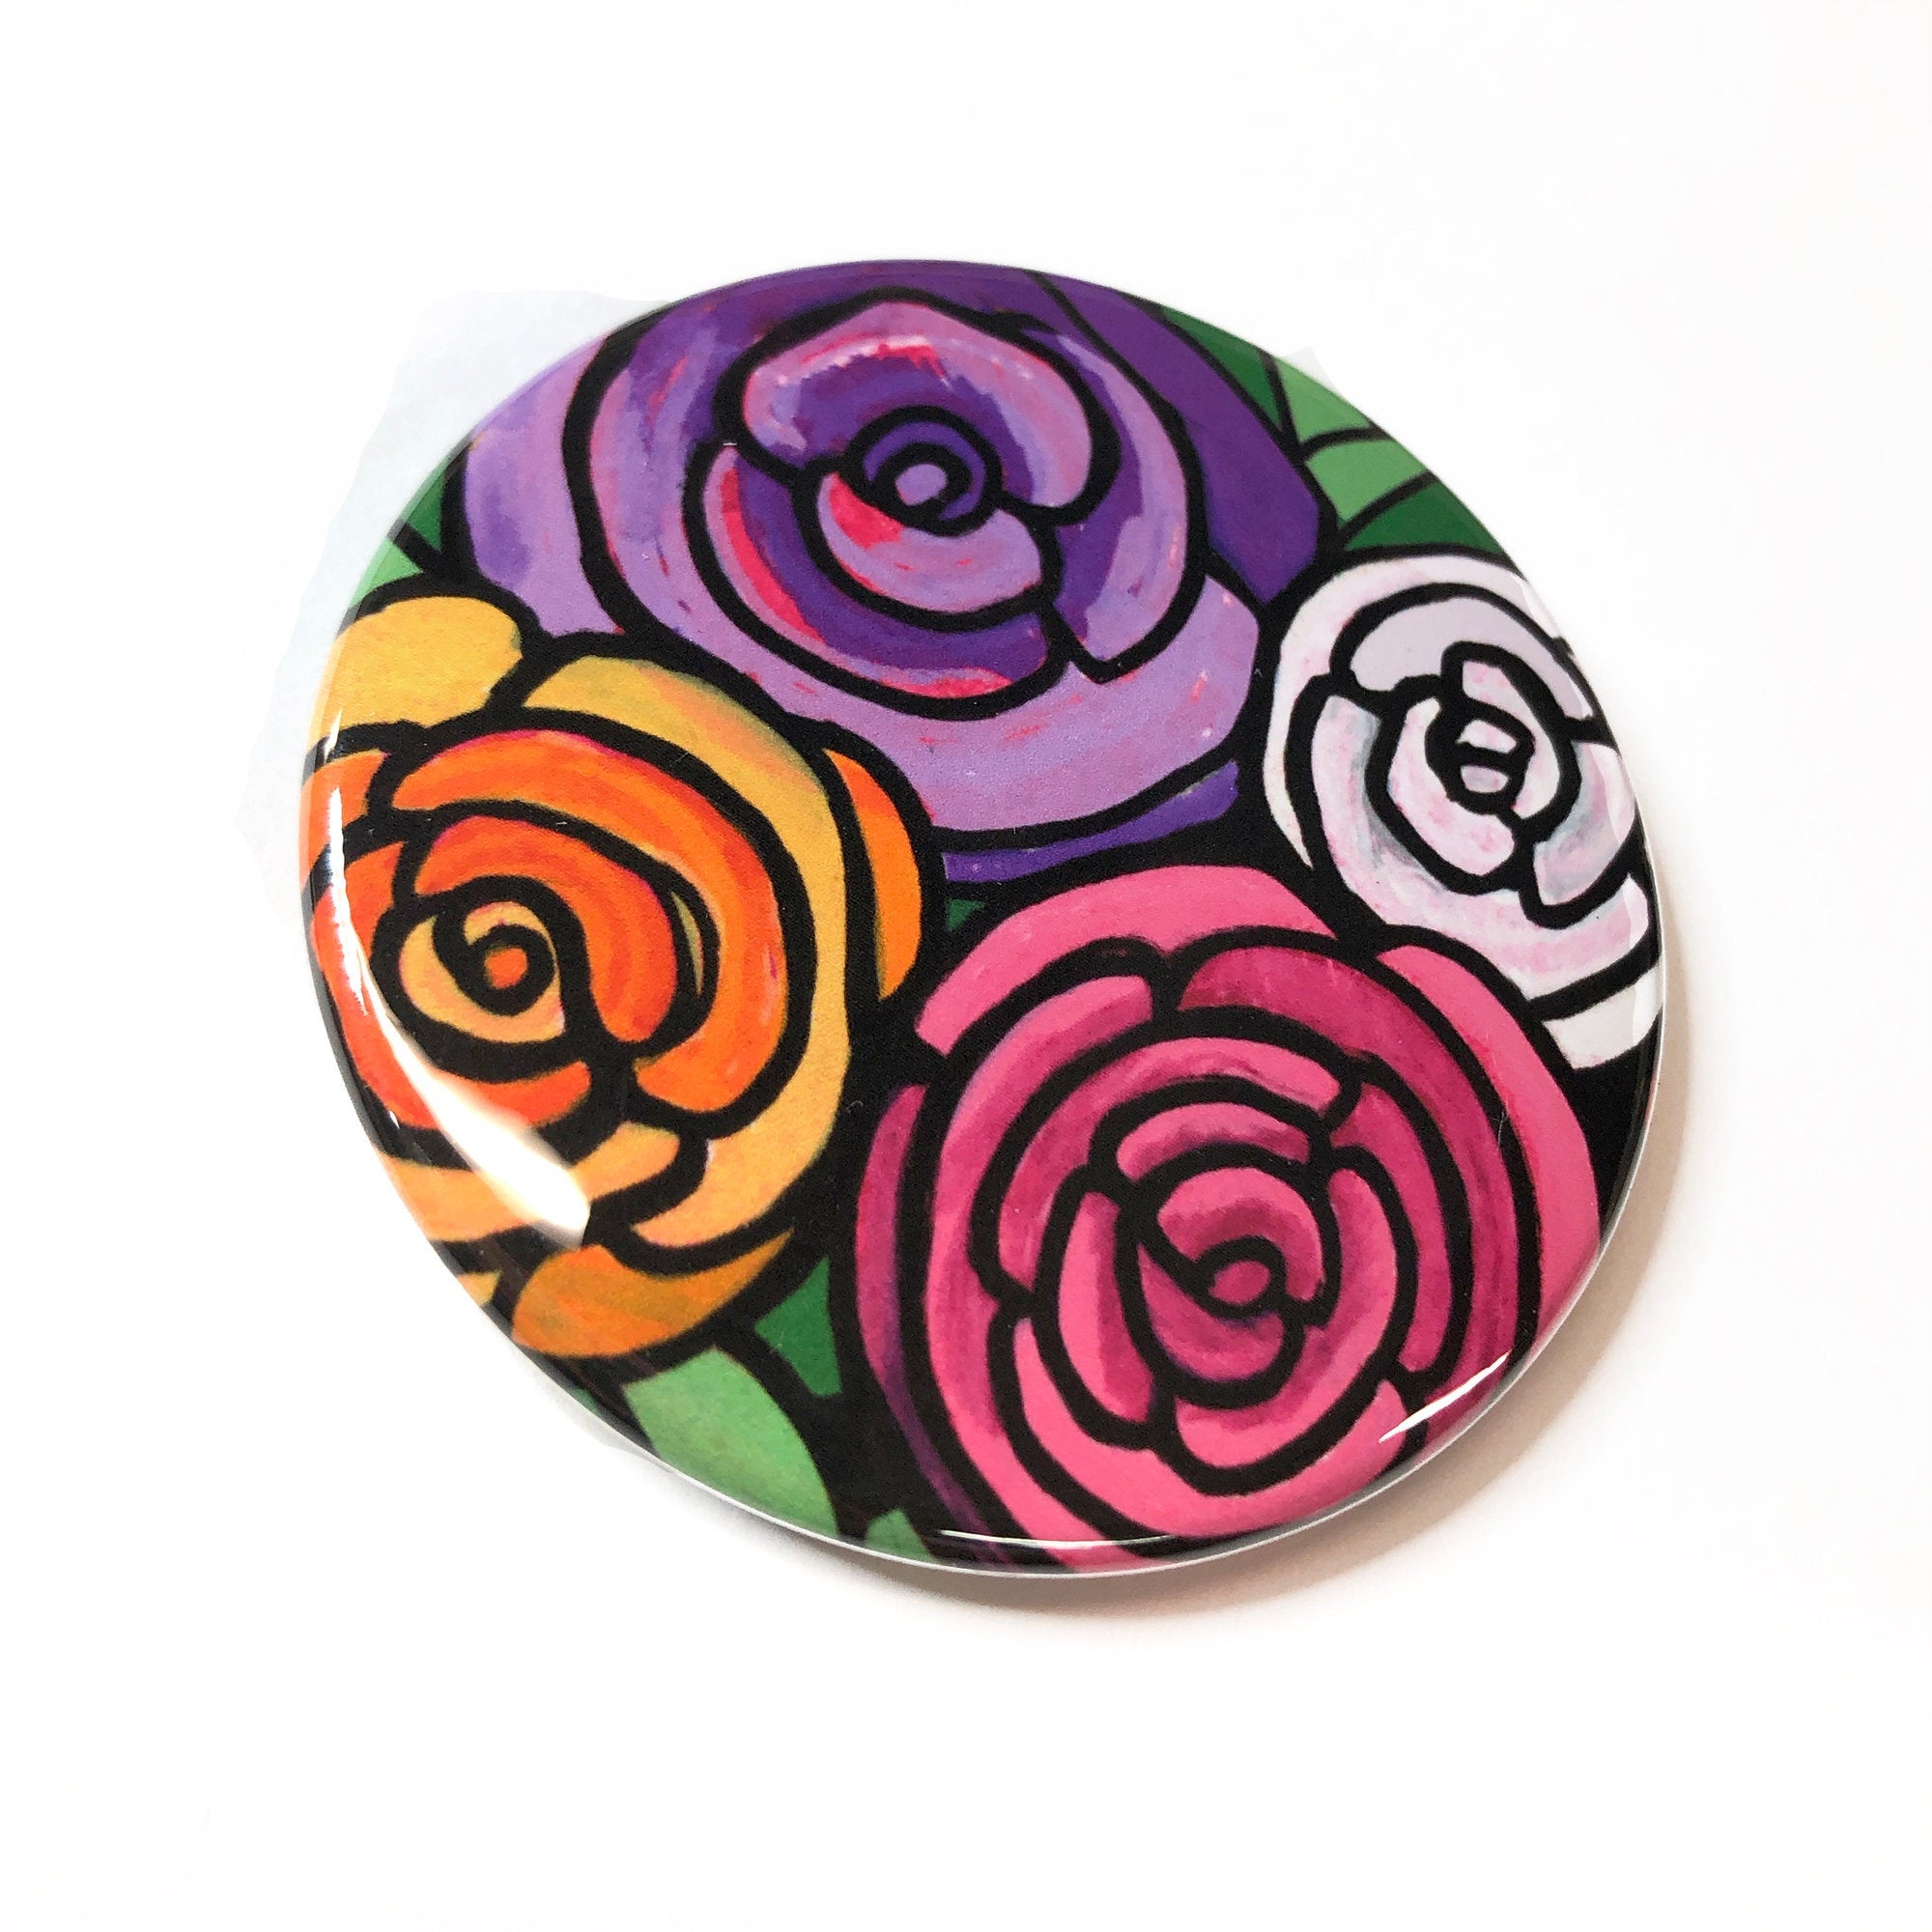 Spring Rose Magnet, Pin Back Button or Pocket Mirror - Pink, Purple, Orange, and White Roses - Wedding Party Favor, Gift Under 5 Dollars